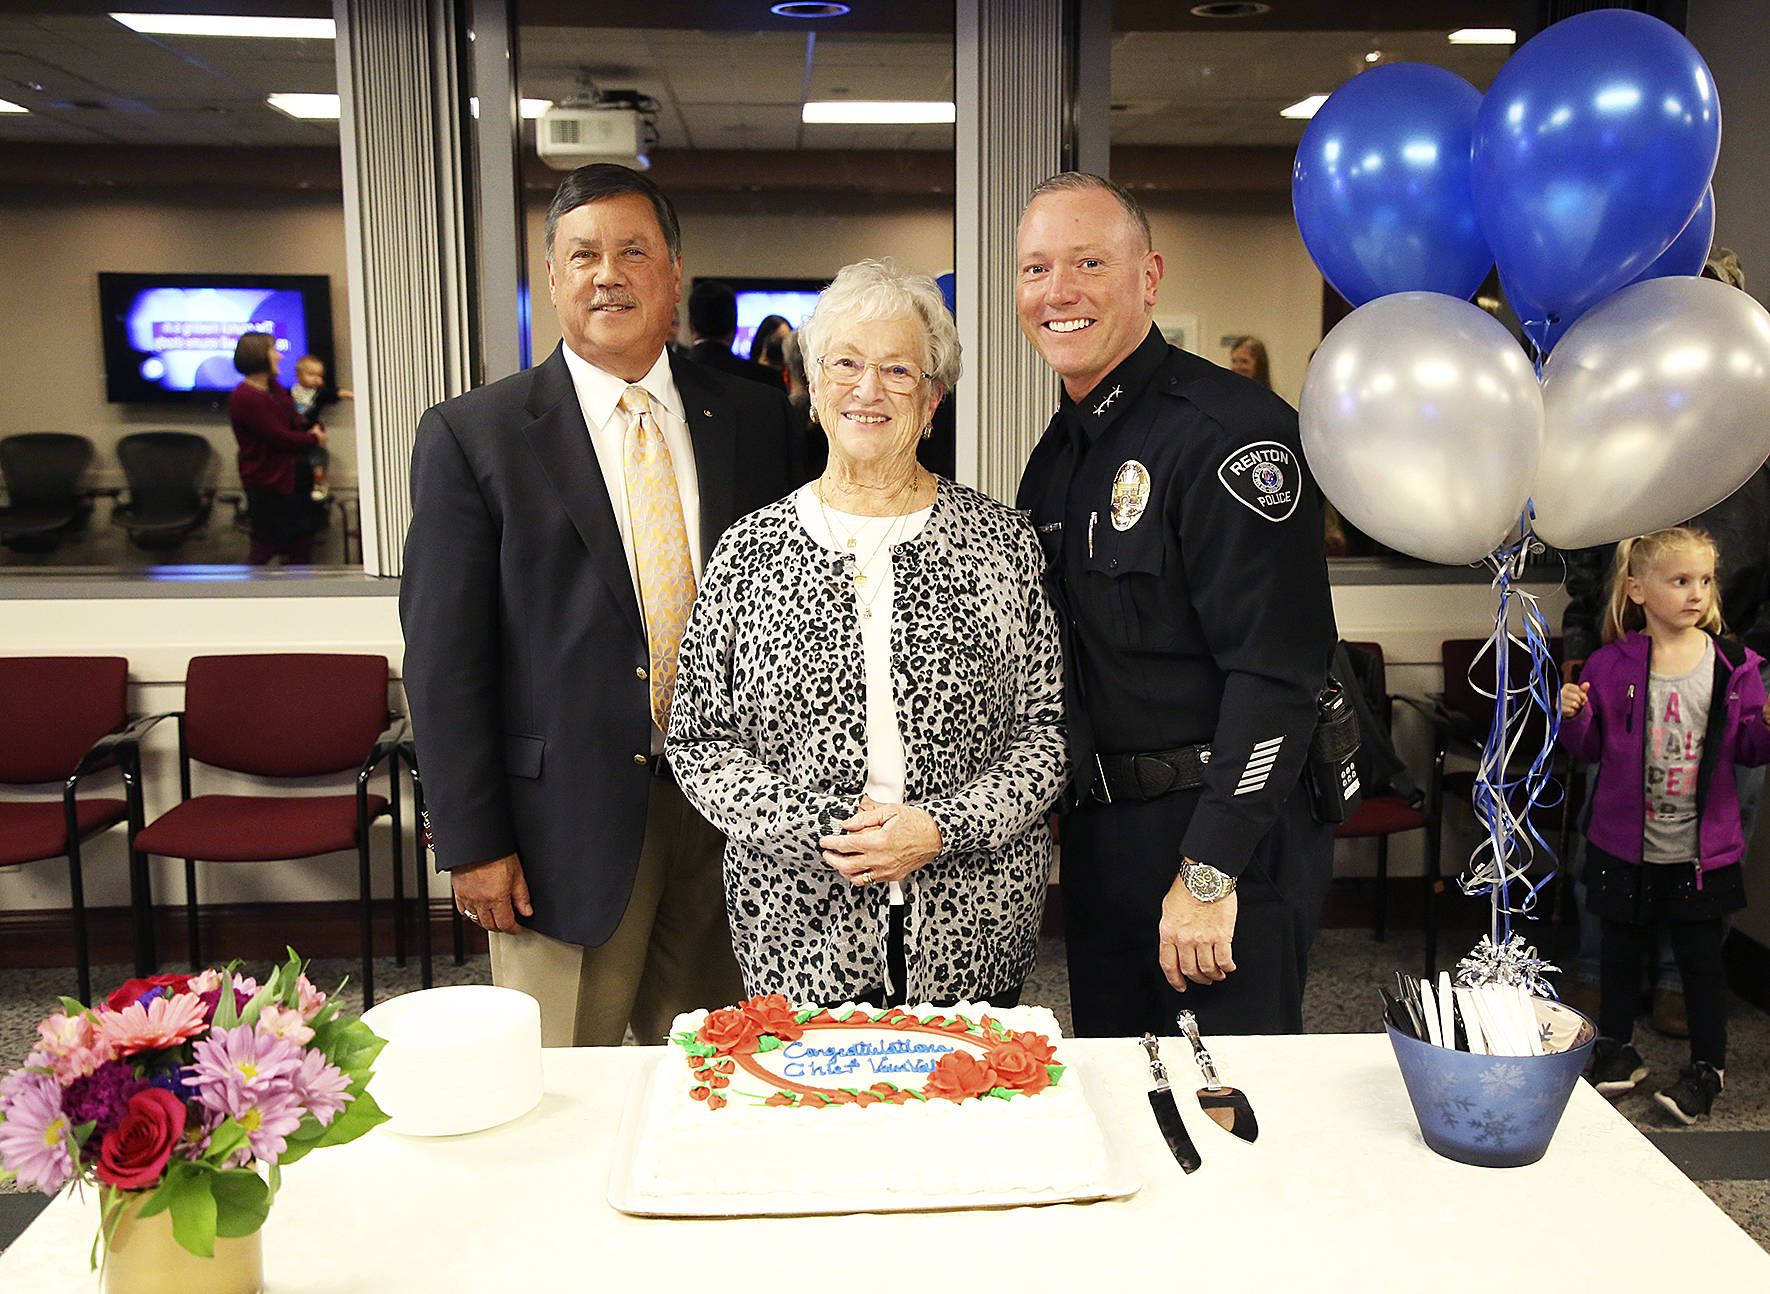 Mayor Denis Law, Police Chief Ed VanValey and his mother Jo Ann VanValey pose at the reception following his swearing in as new chief of police. Photo by Ava Van, City of Renton.